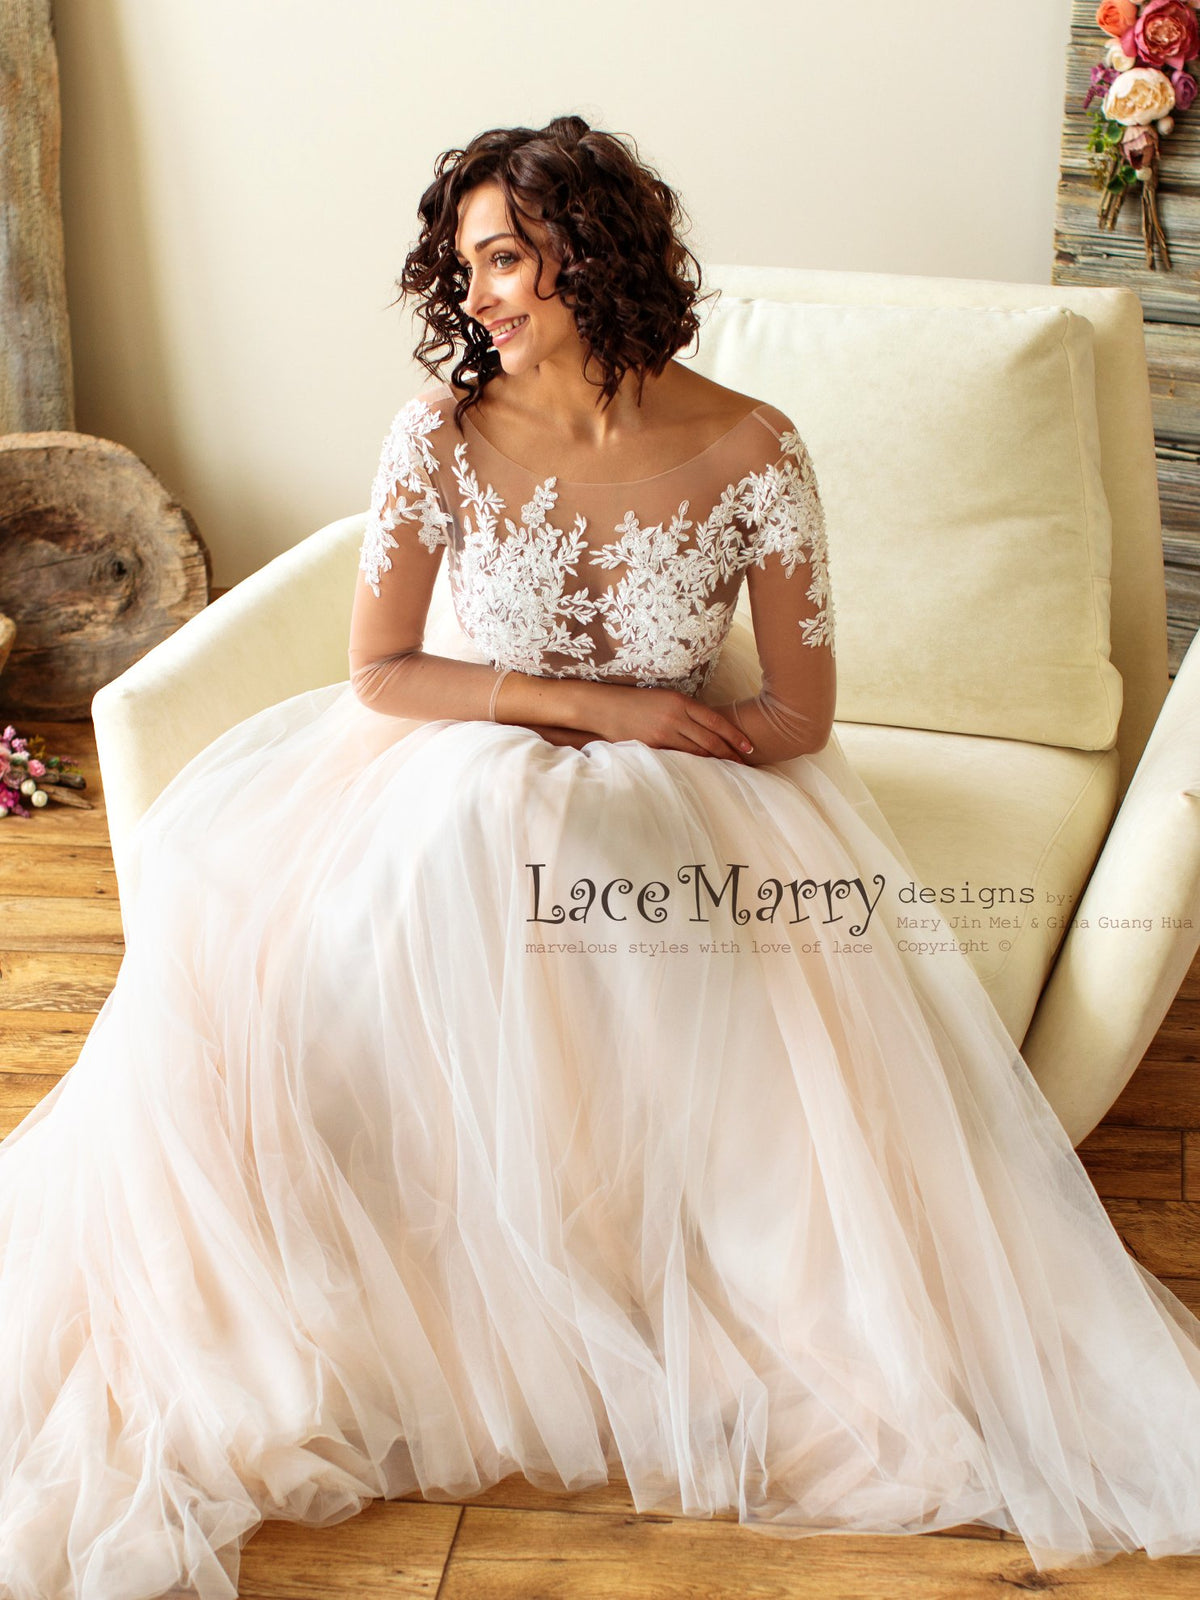 Amazing Ombre Tulle Skirt with Sexy Lace Top